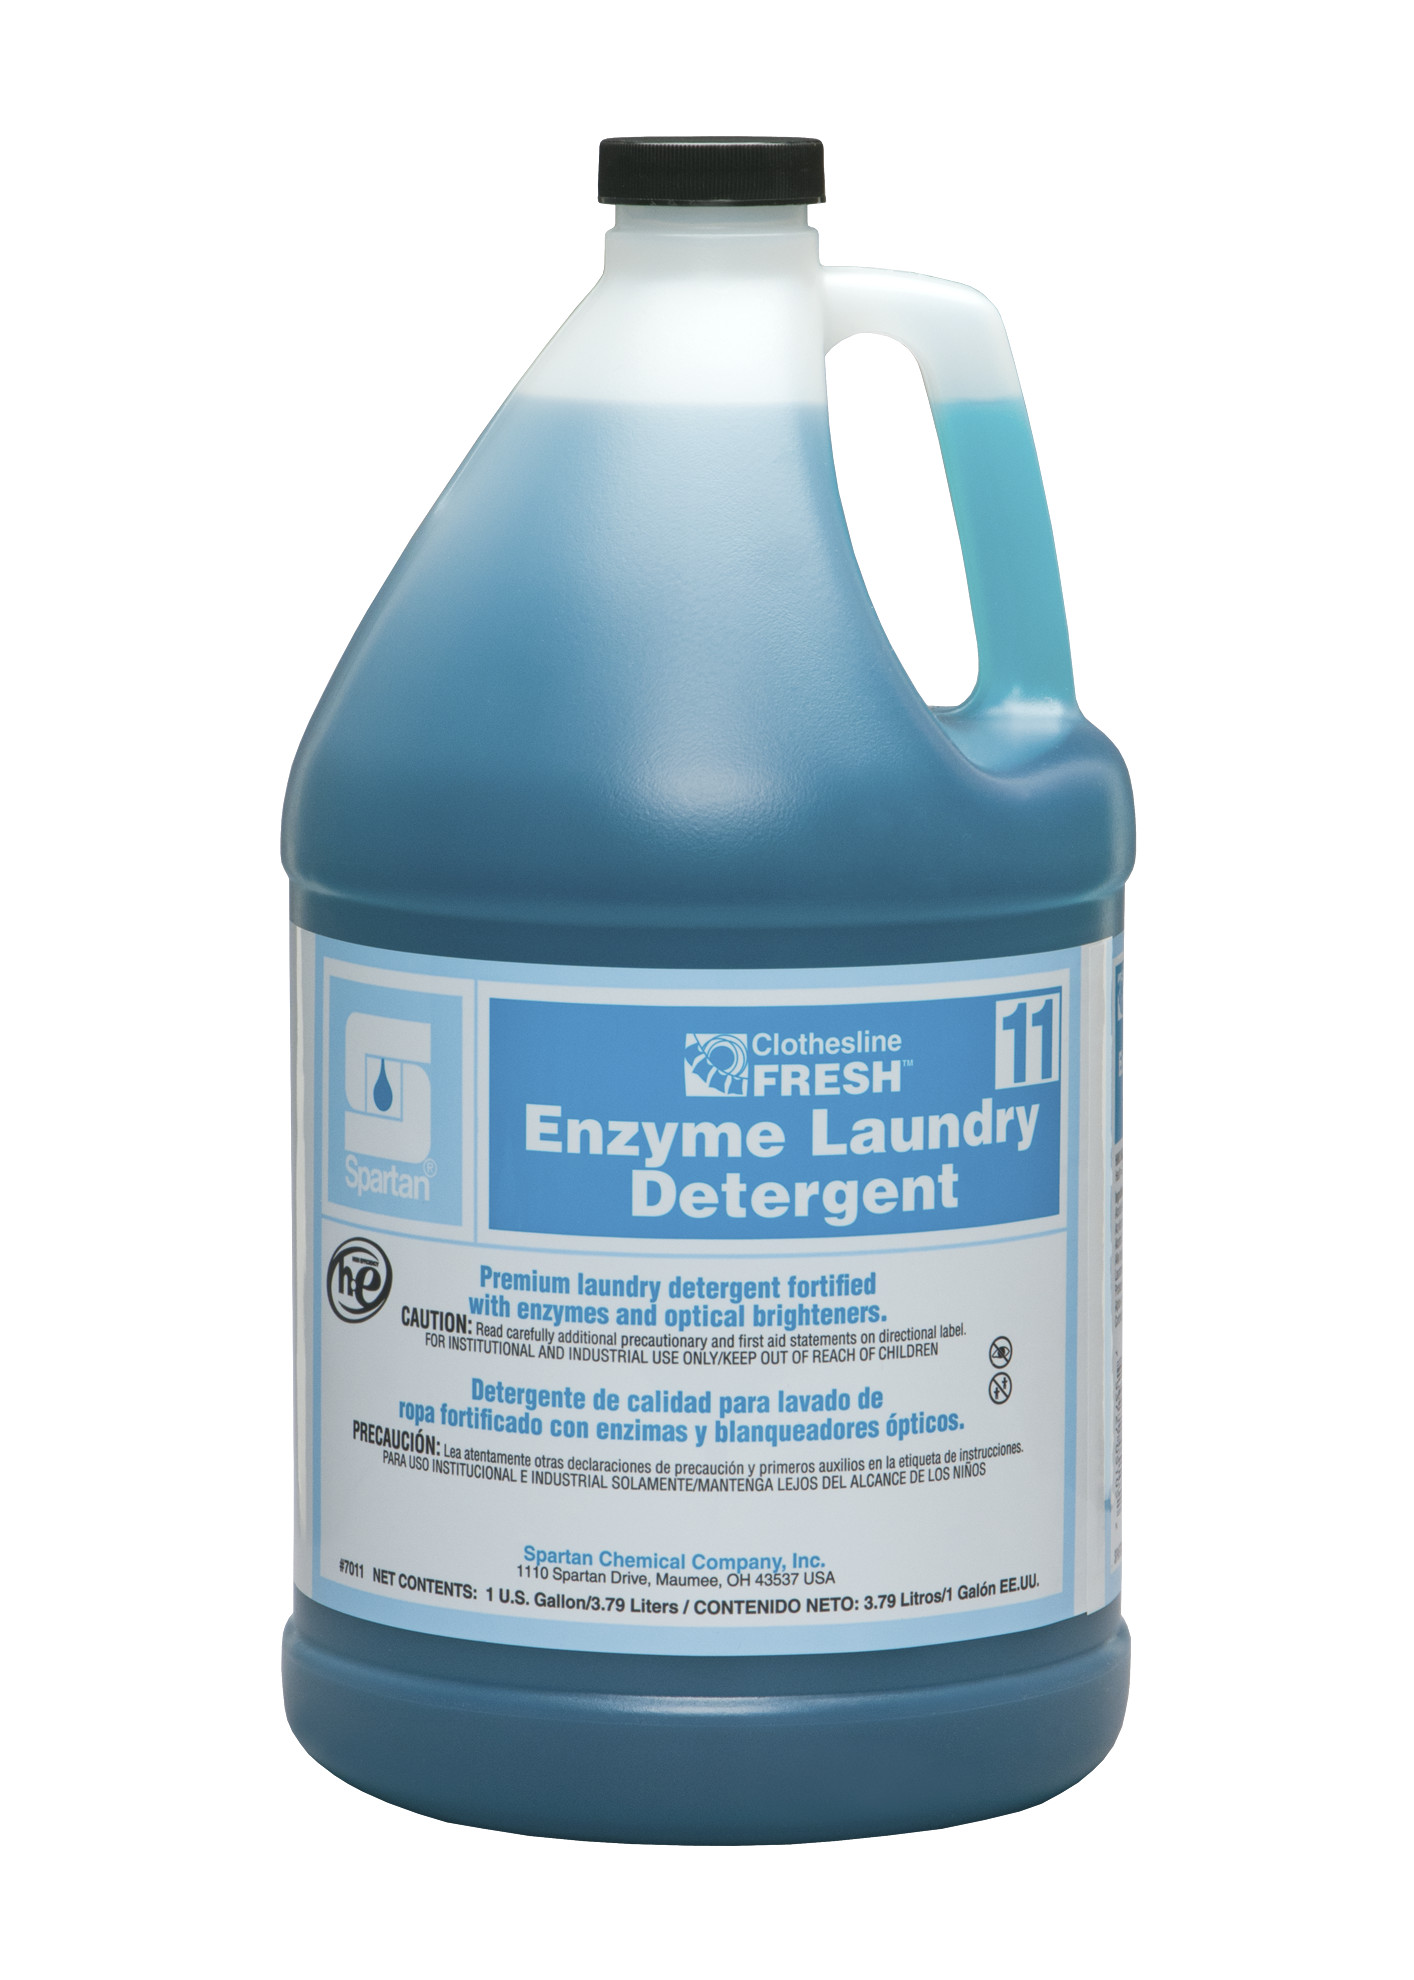 Spartan Chemical Company Clothesline Fresh Enzyme Laundry Detergent 11, 1 GAL 4/CSE